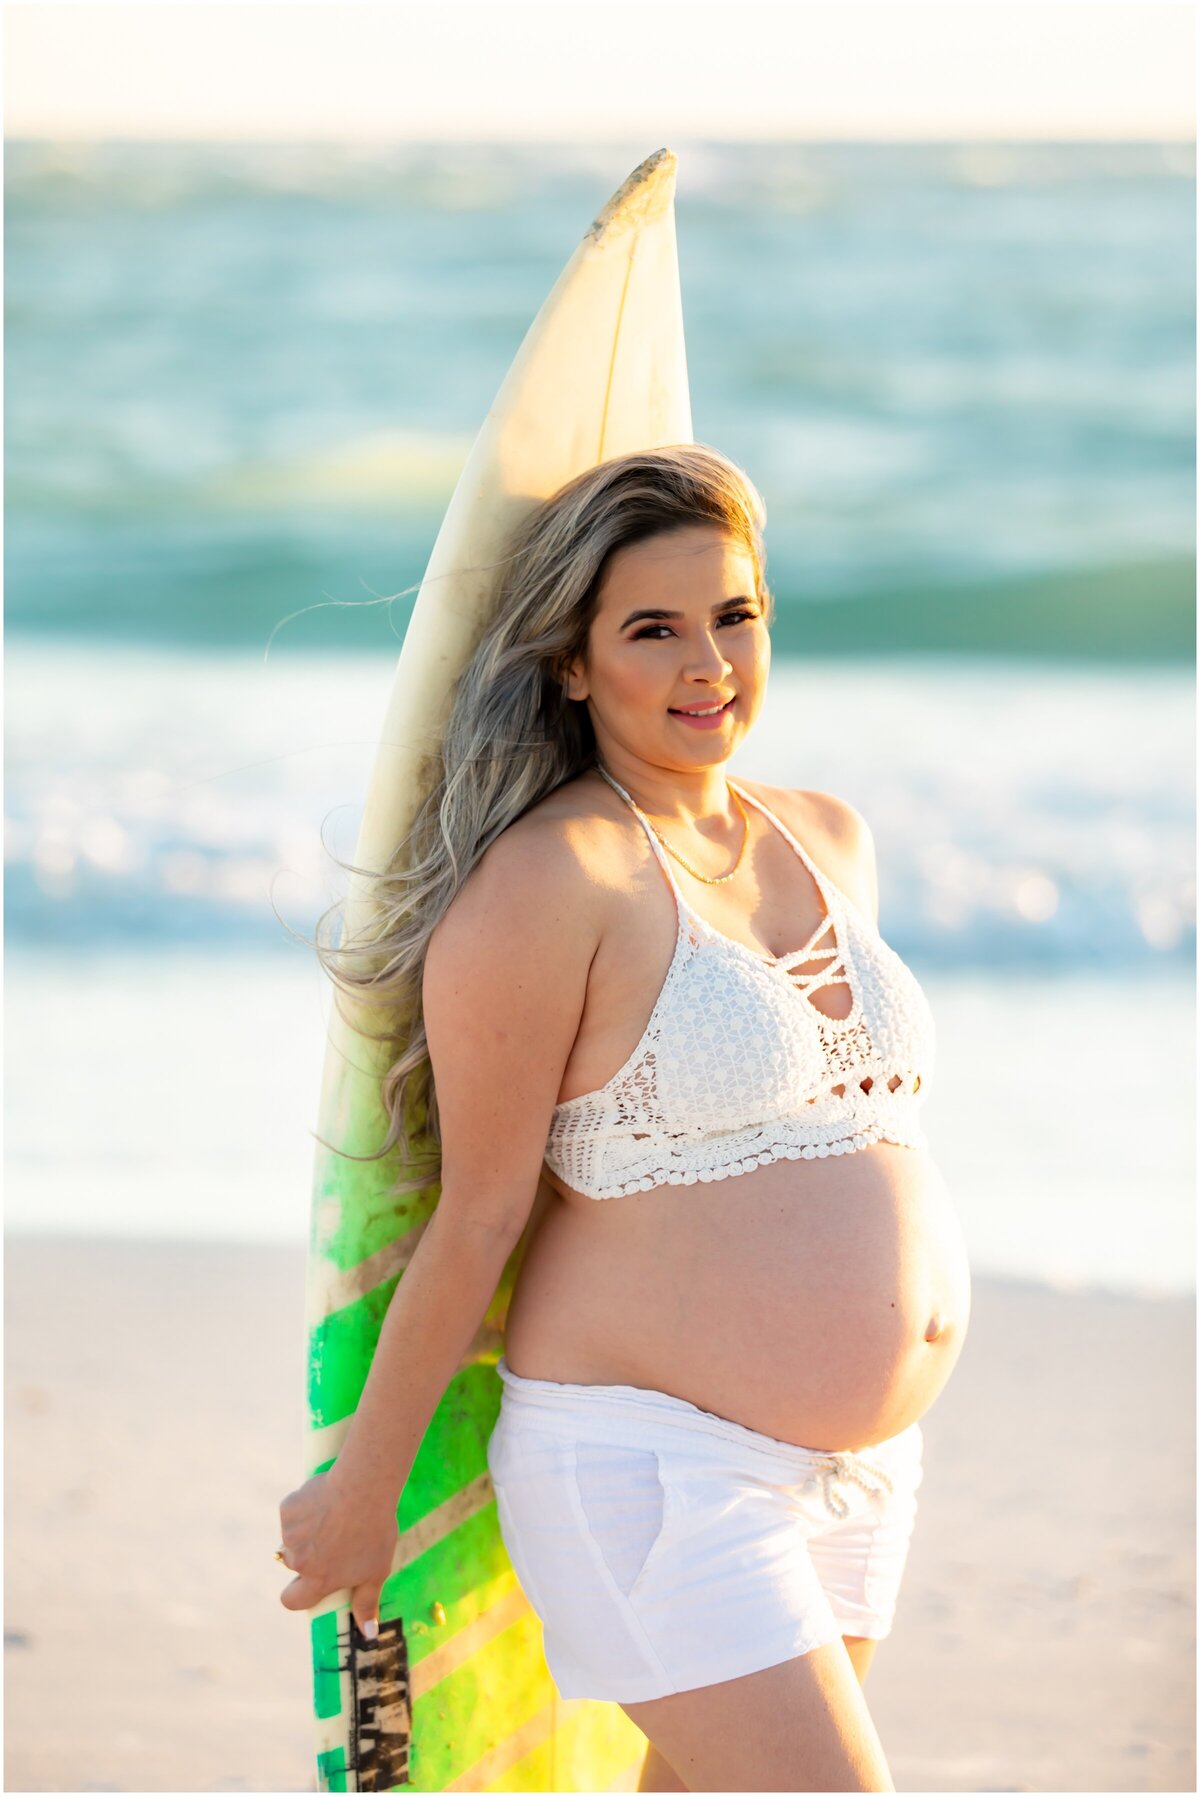 A maternity photoshoot with mom to be holding a surf board.